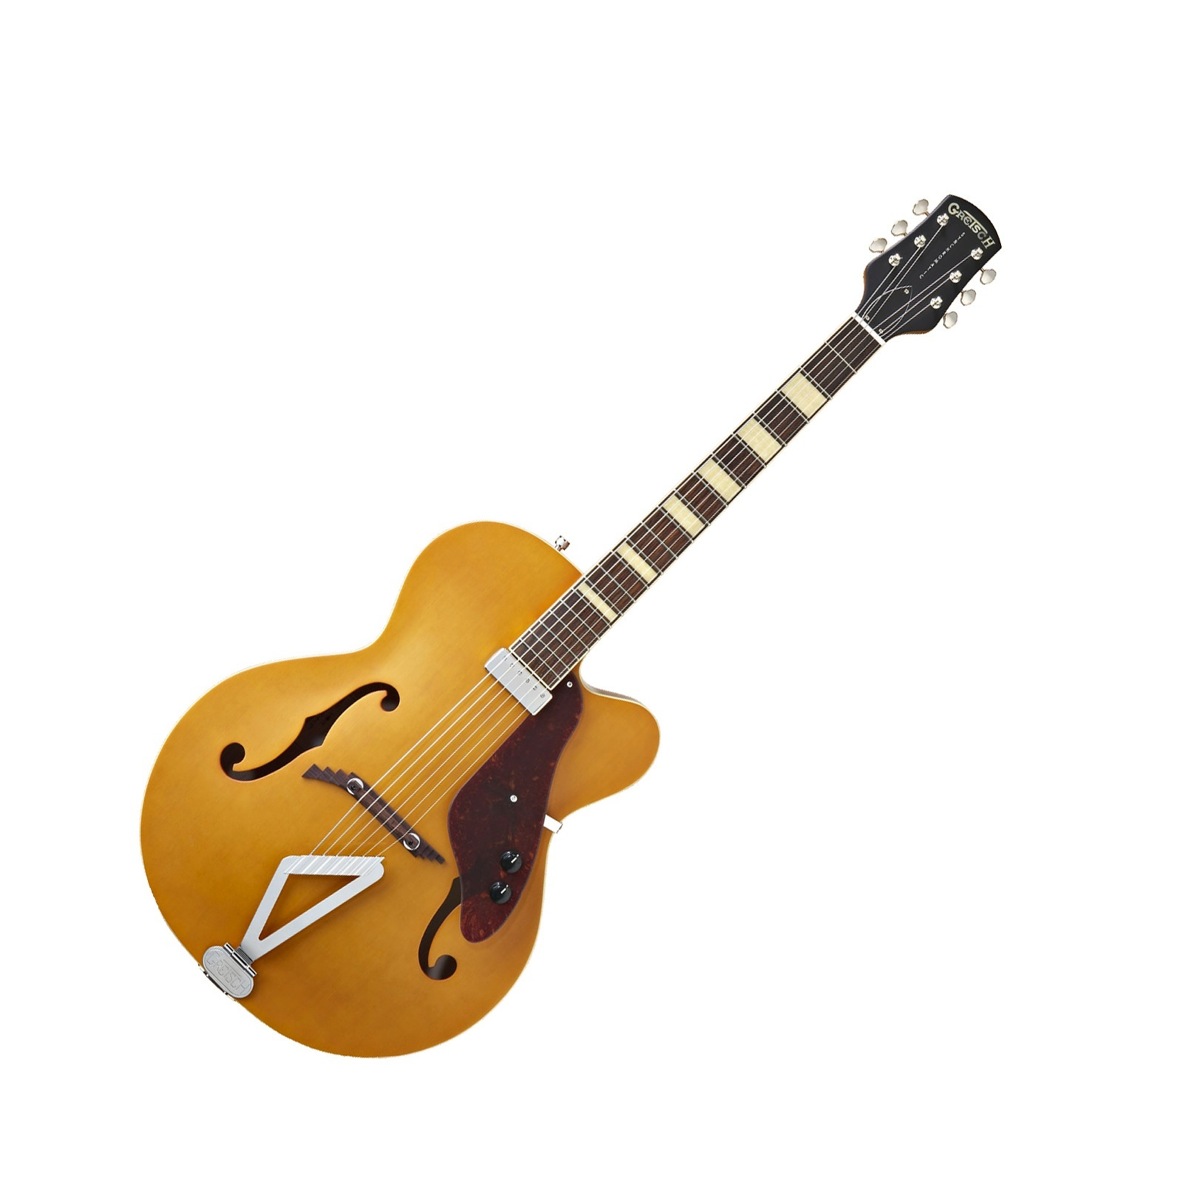 Gretsch Guitars and Drums Gretsch Synchromatic G100CE Archtop Acoustic-Electric Guitar - Natural